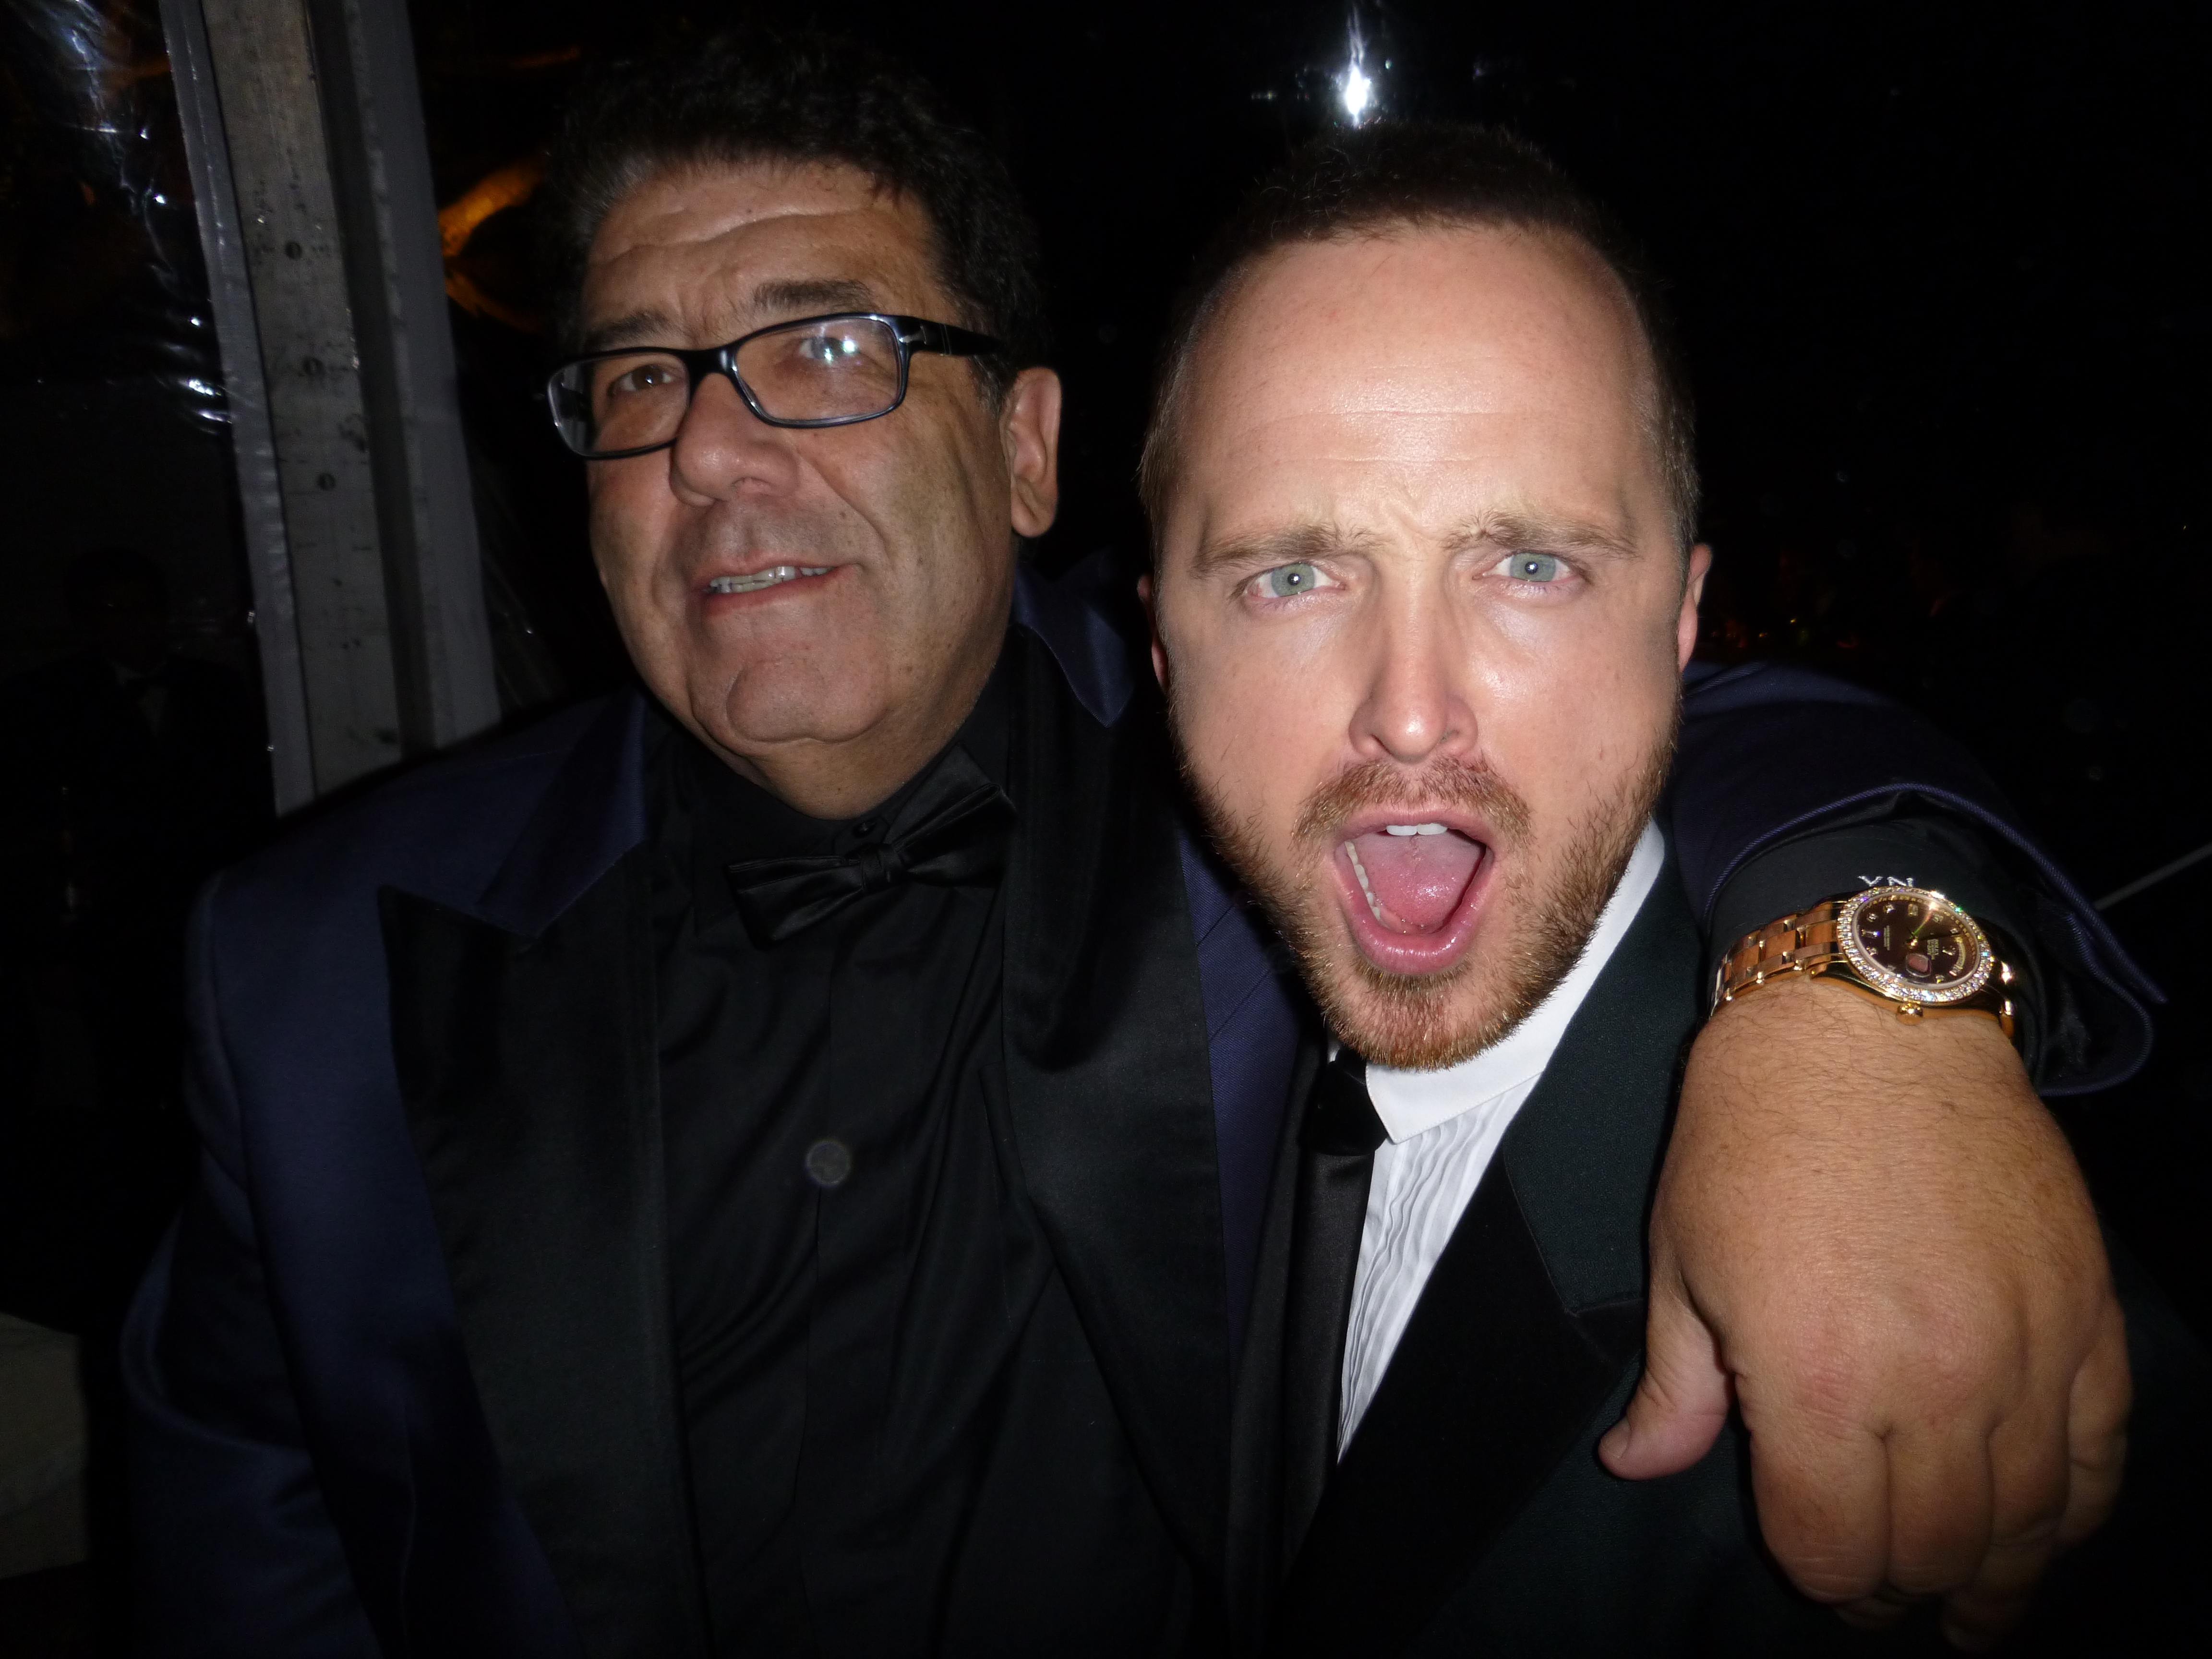 Producer Victorino Noval and Emmy Award Winning Actor Aaron Paul at the 2014 Golden Globe Awards